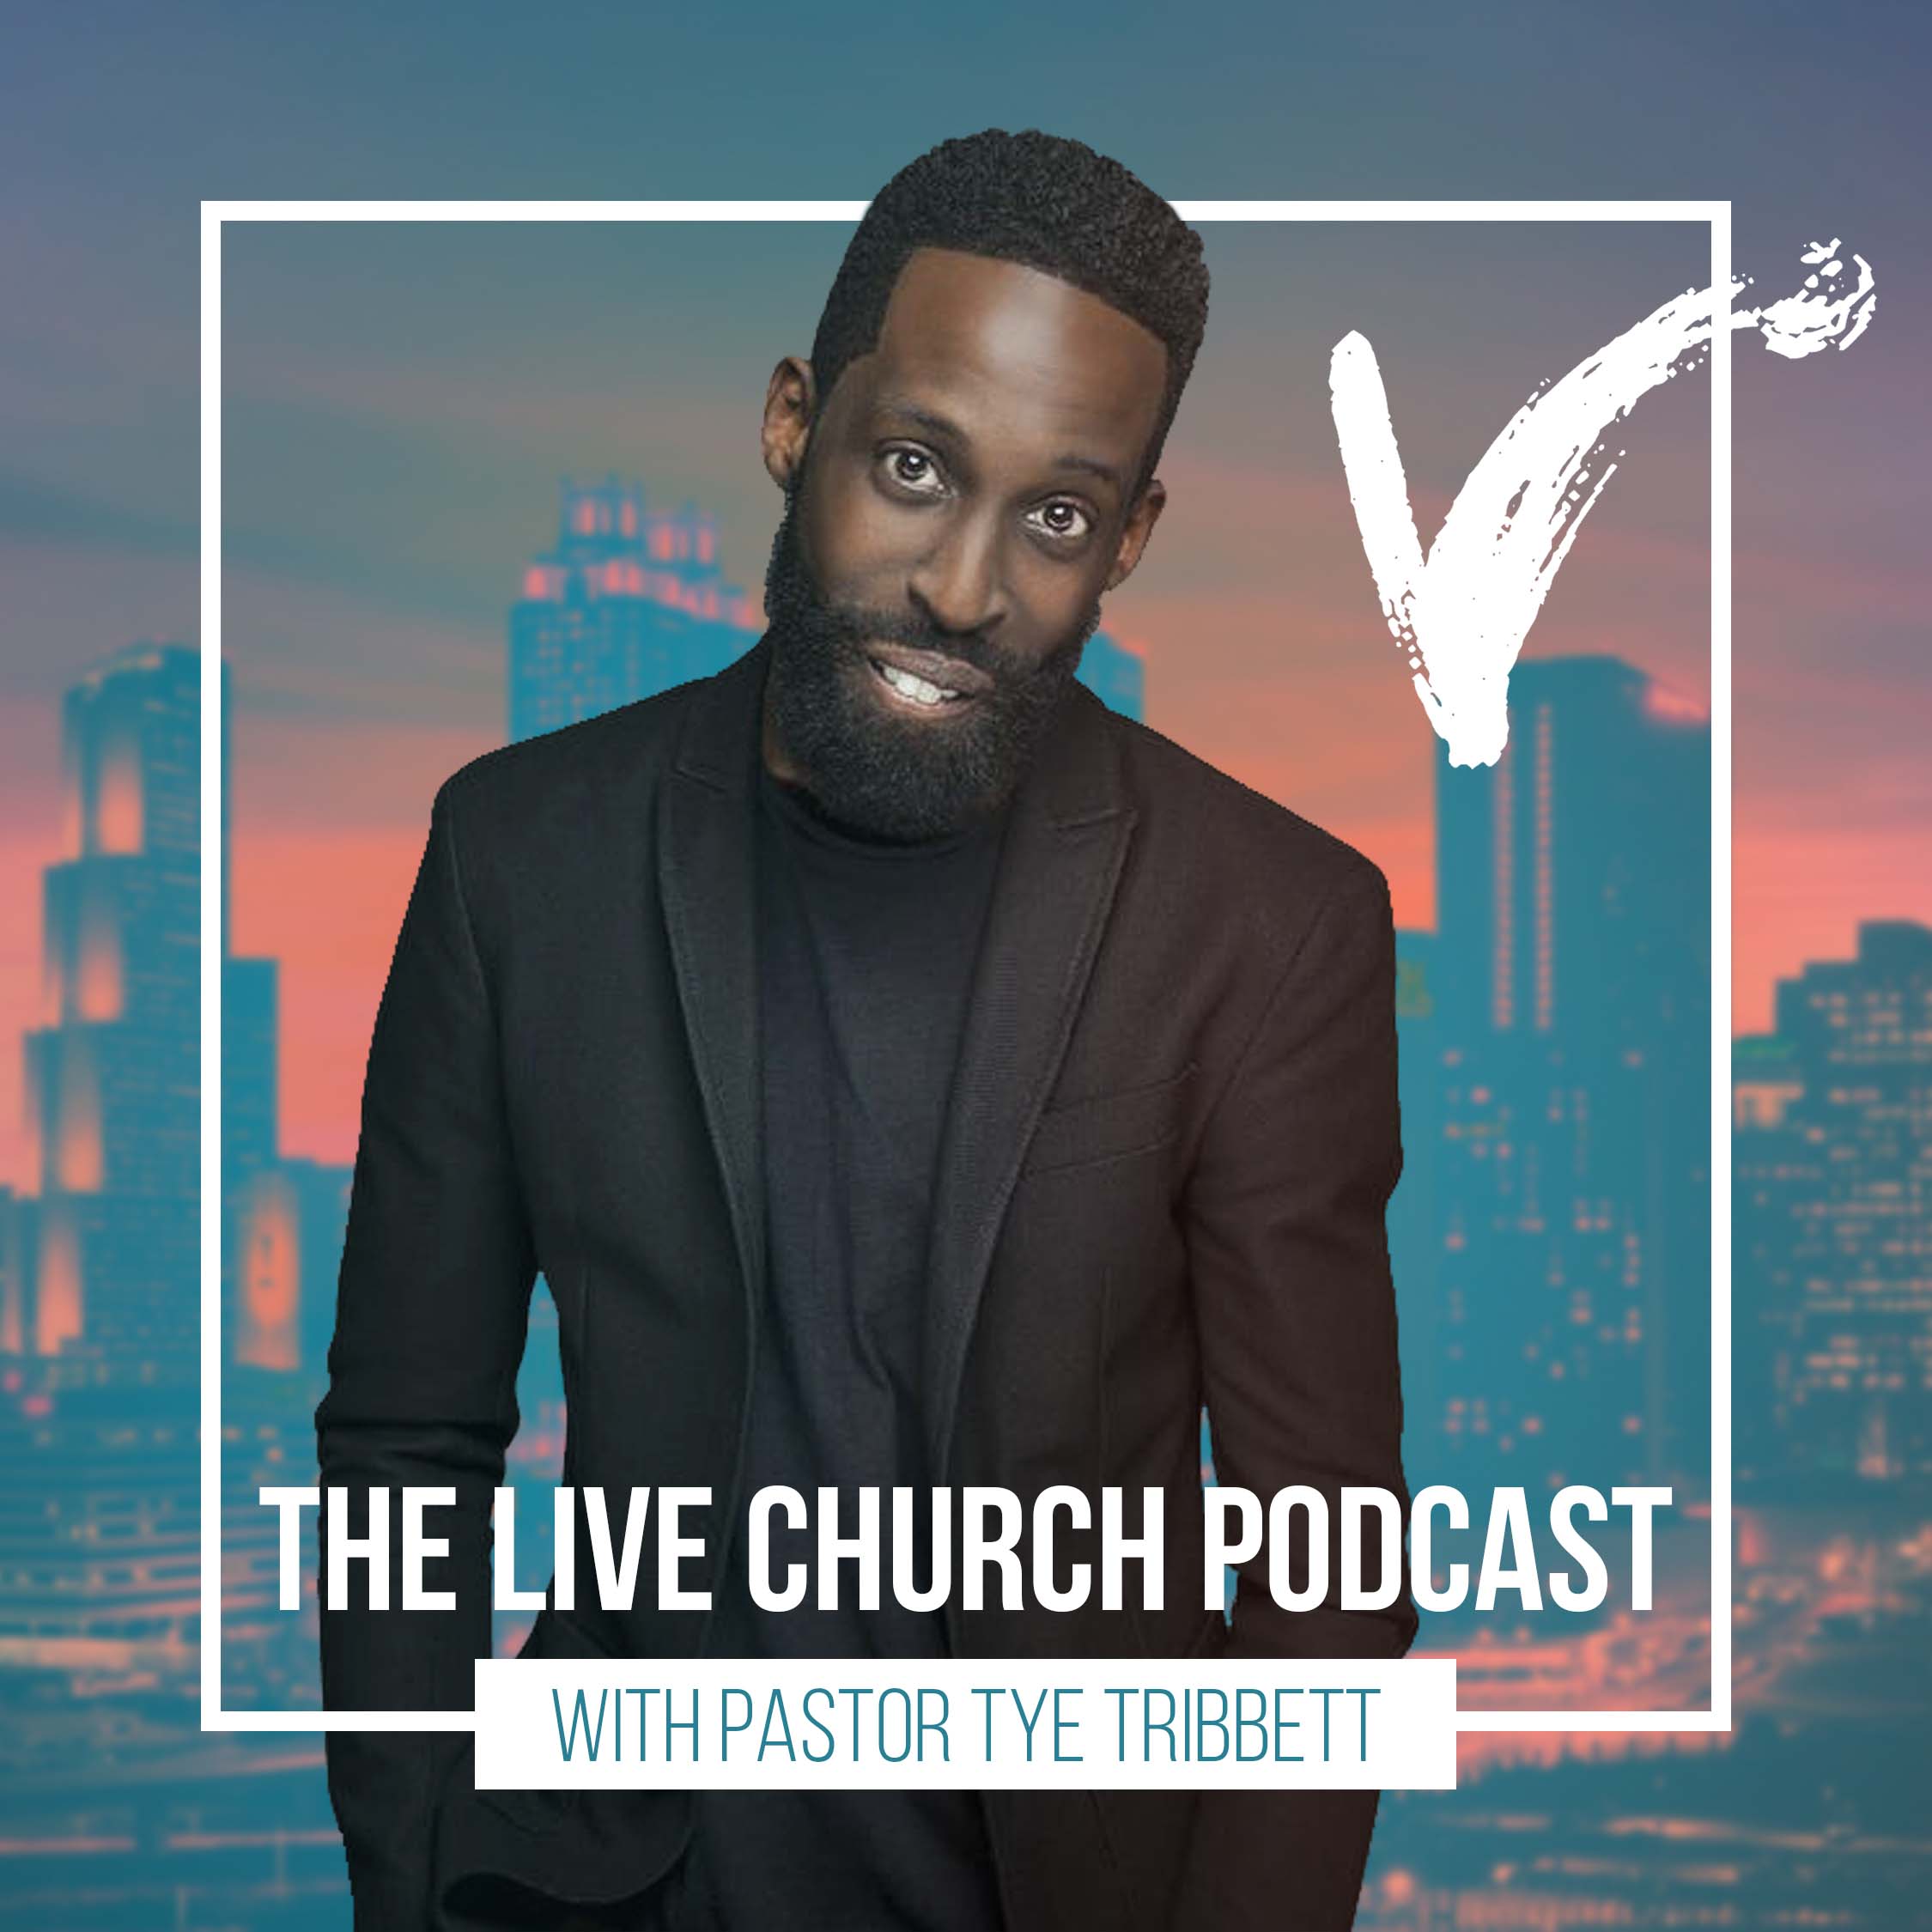 The Live Church Podcast